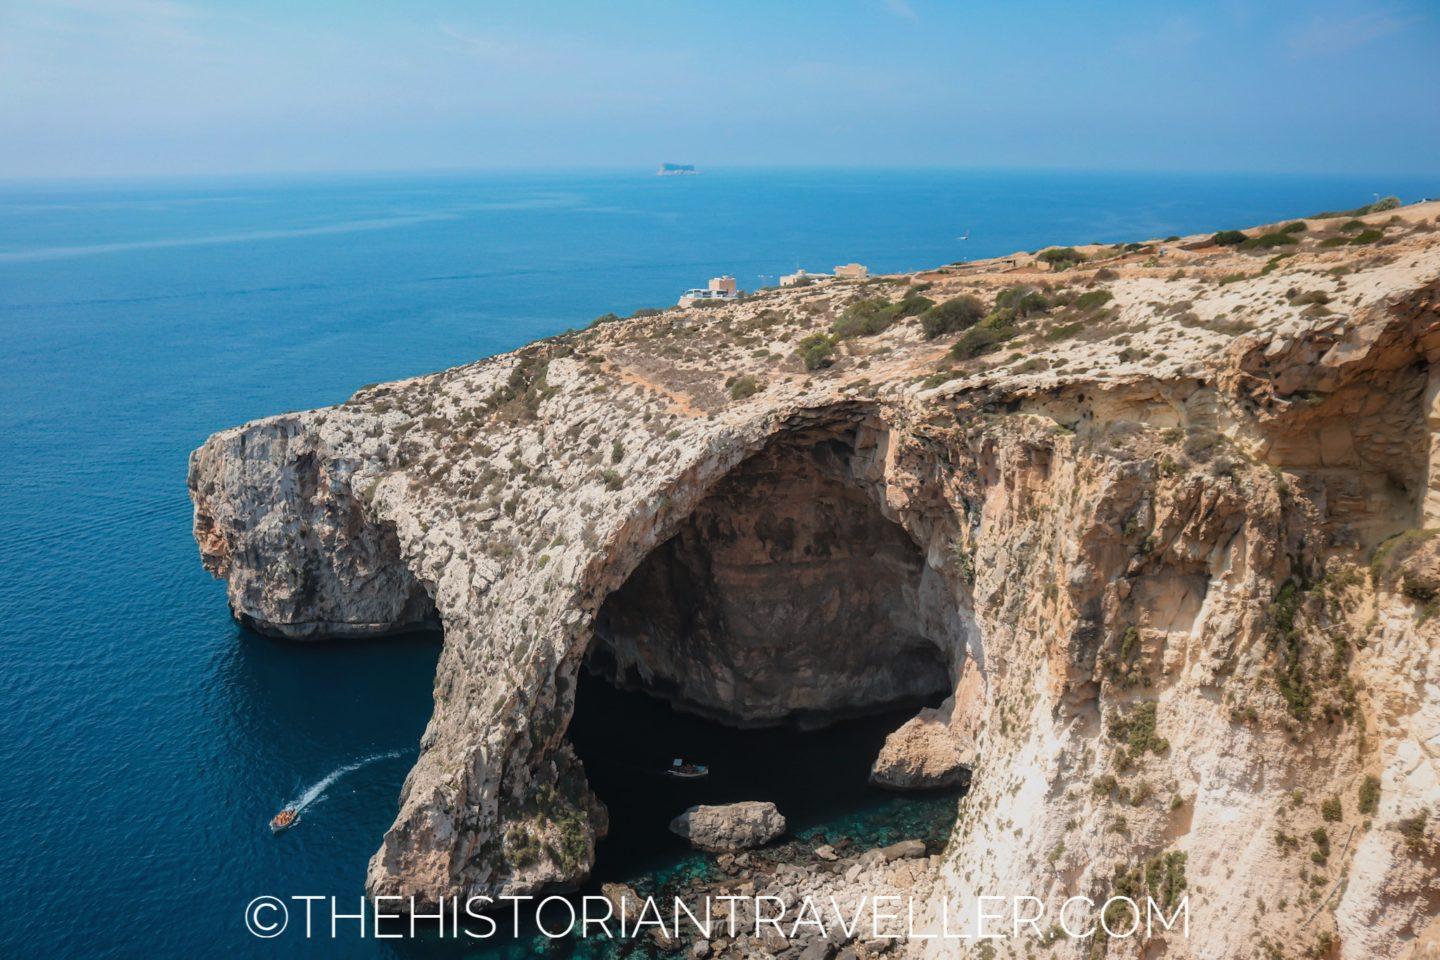 View of the Blue Grotto from the view point